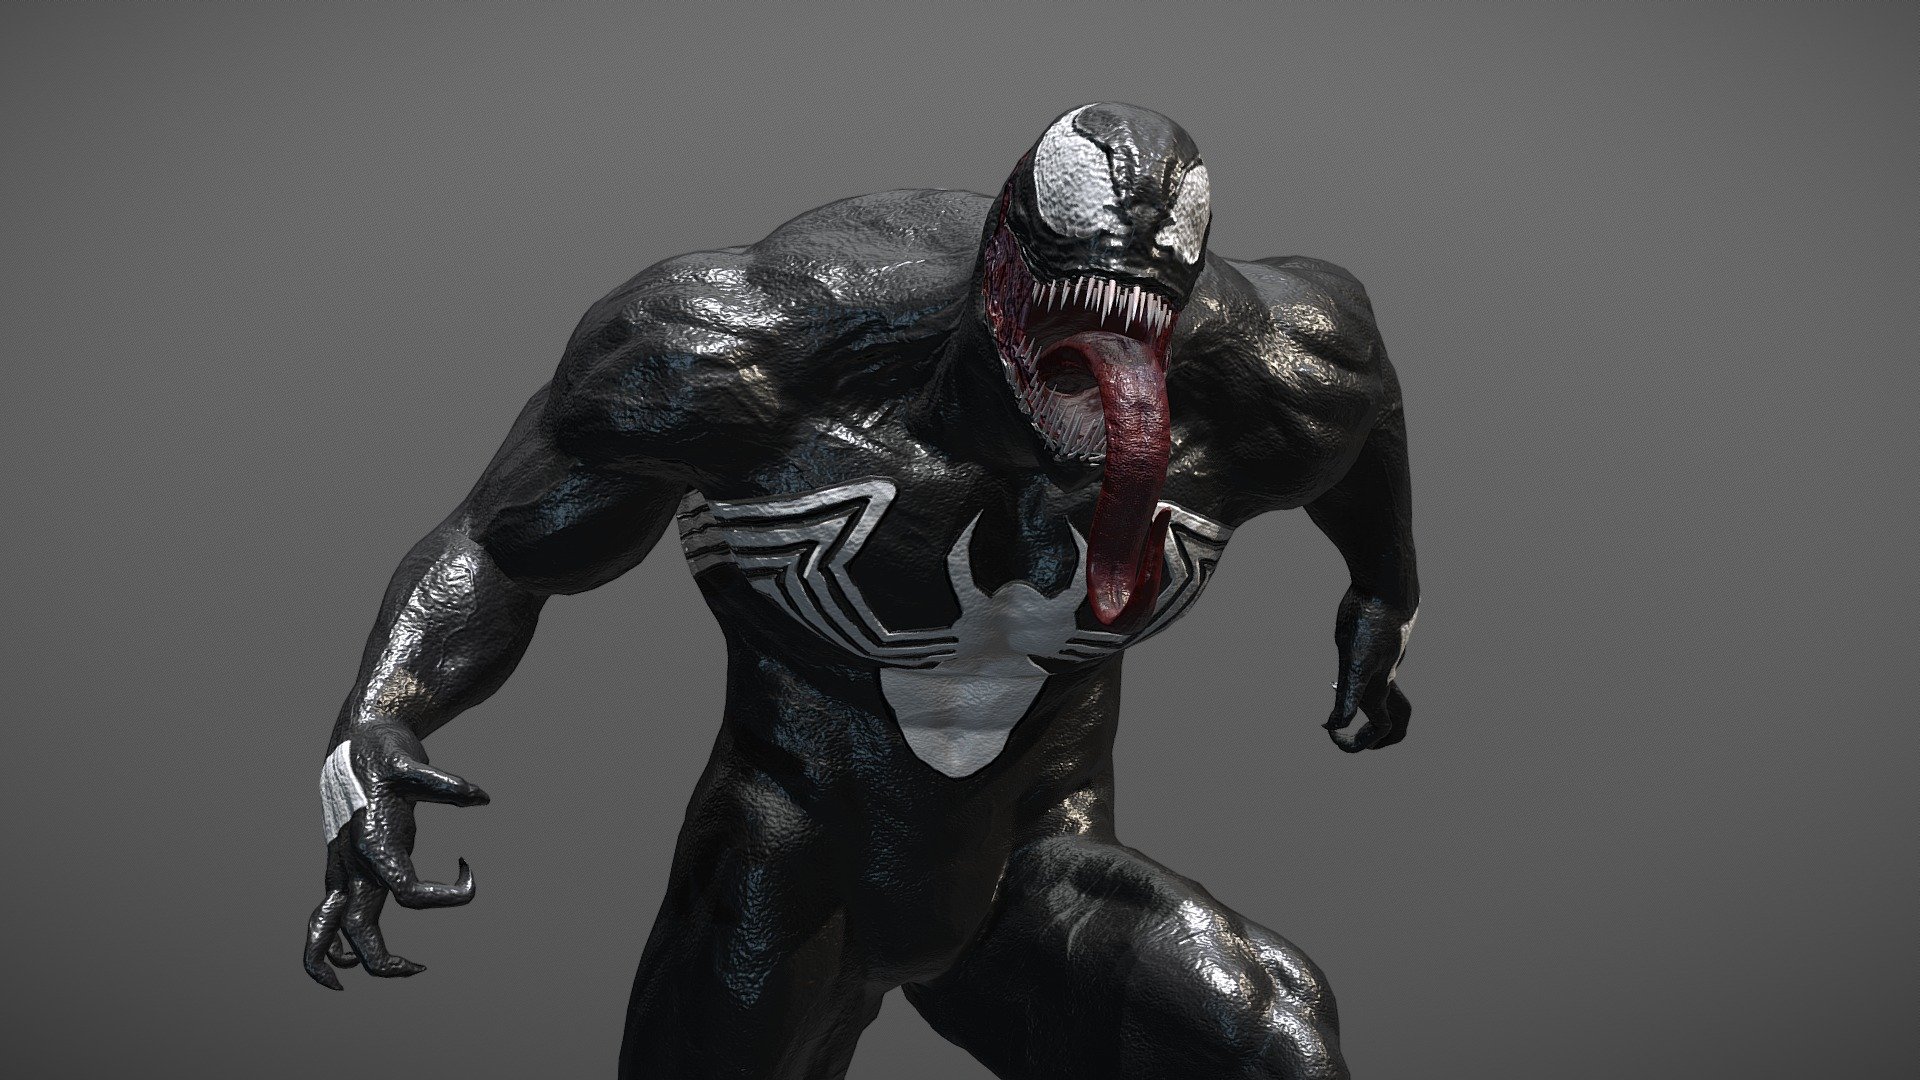 Venom side project I did while learning anatomy. Hope you guys like it :) - Venom - 3D model by KelvOH 3d model